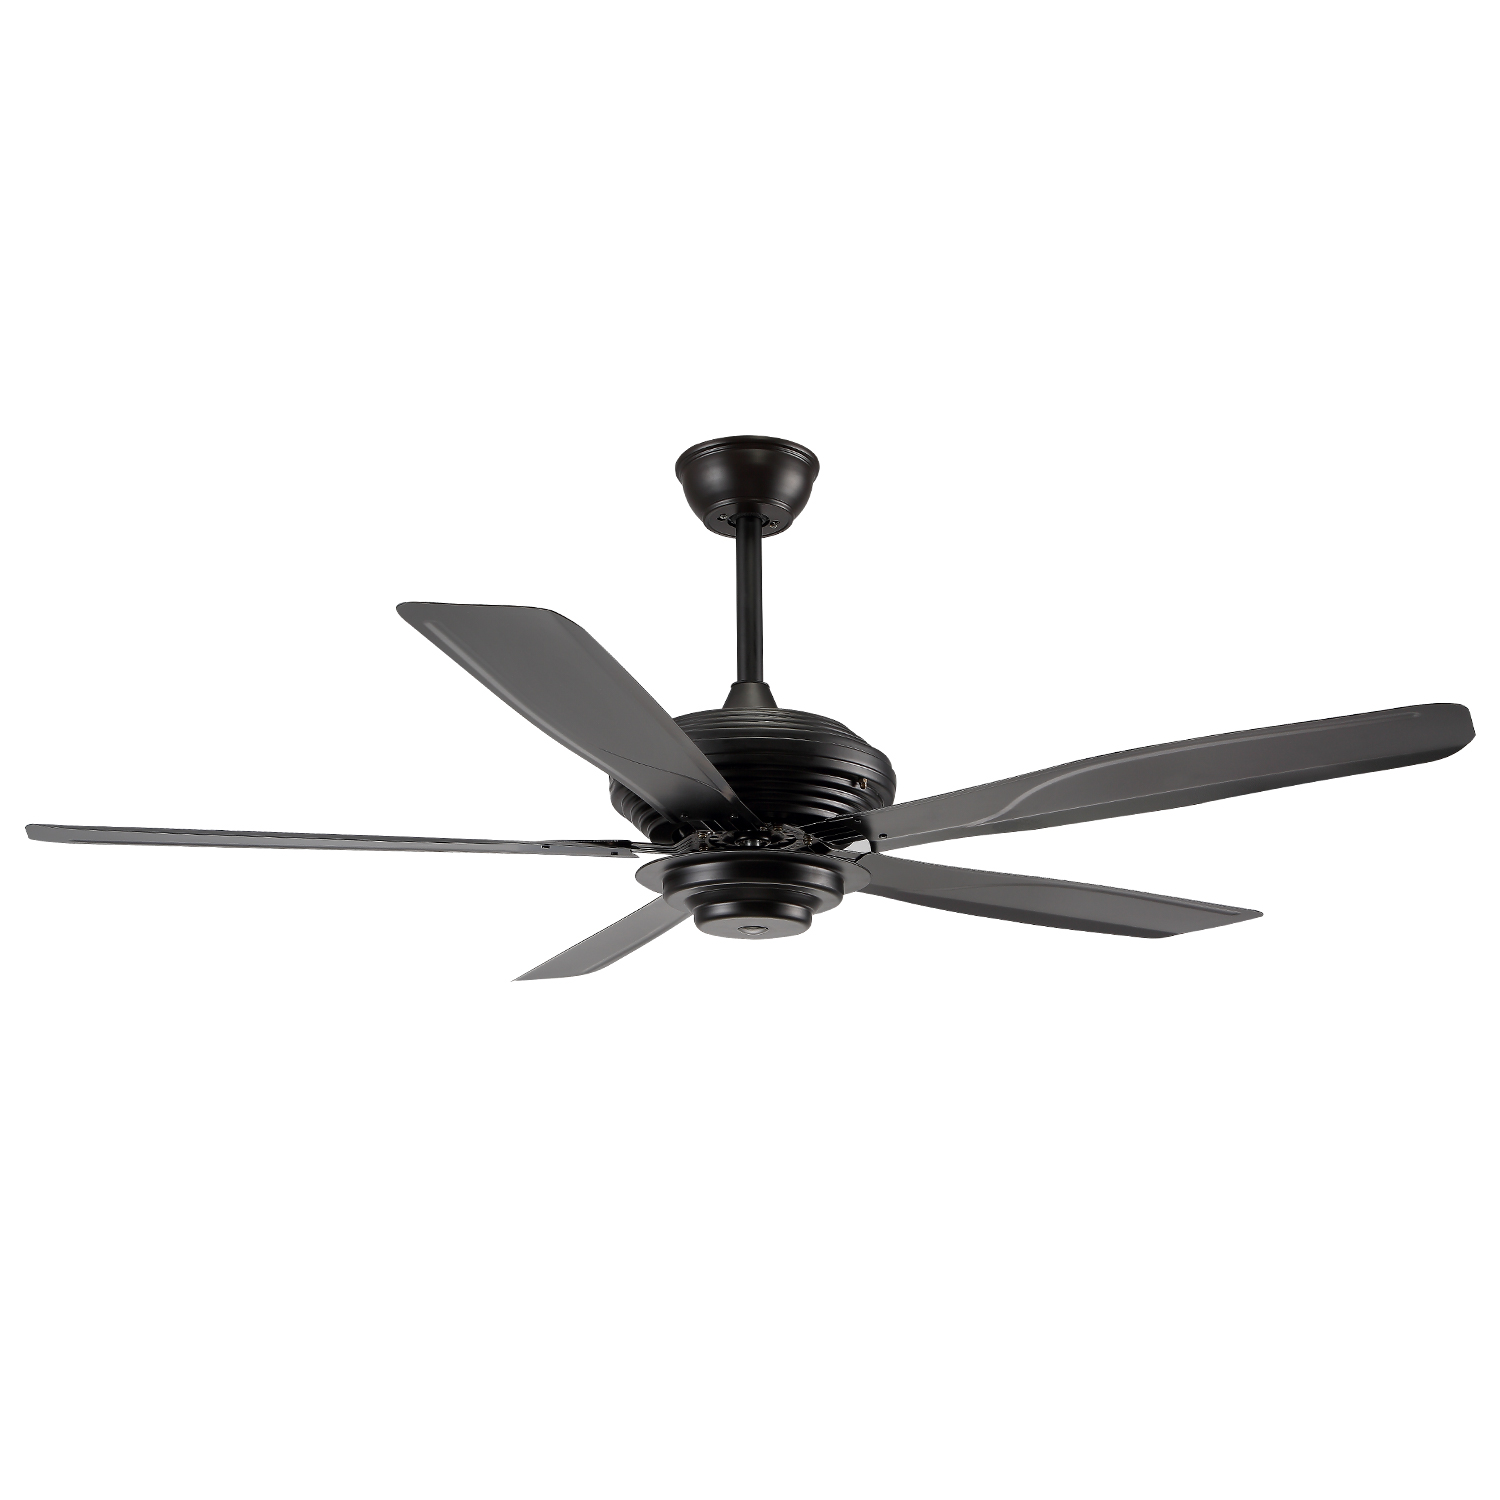 Large Ceiling Fan: Everything You Need to Know About China's Latest Innovation